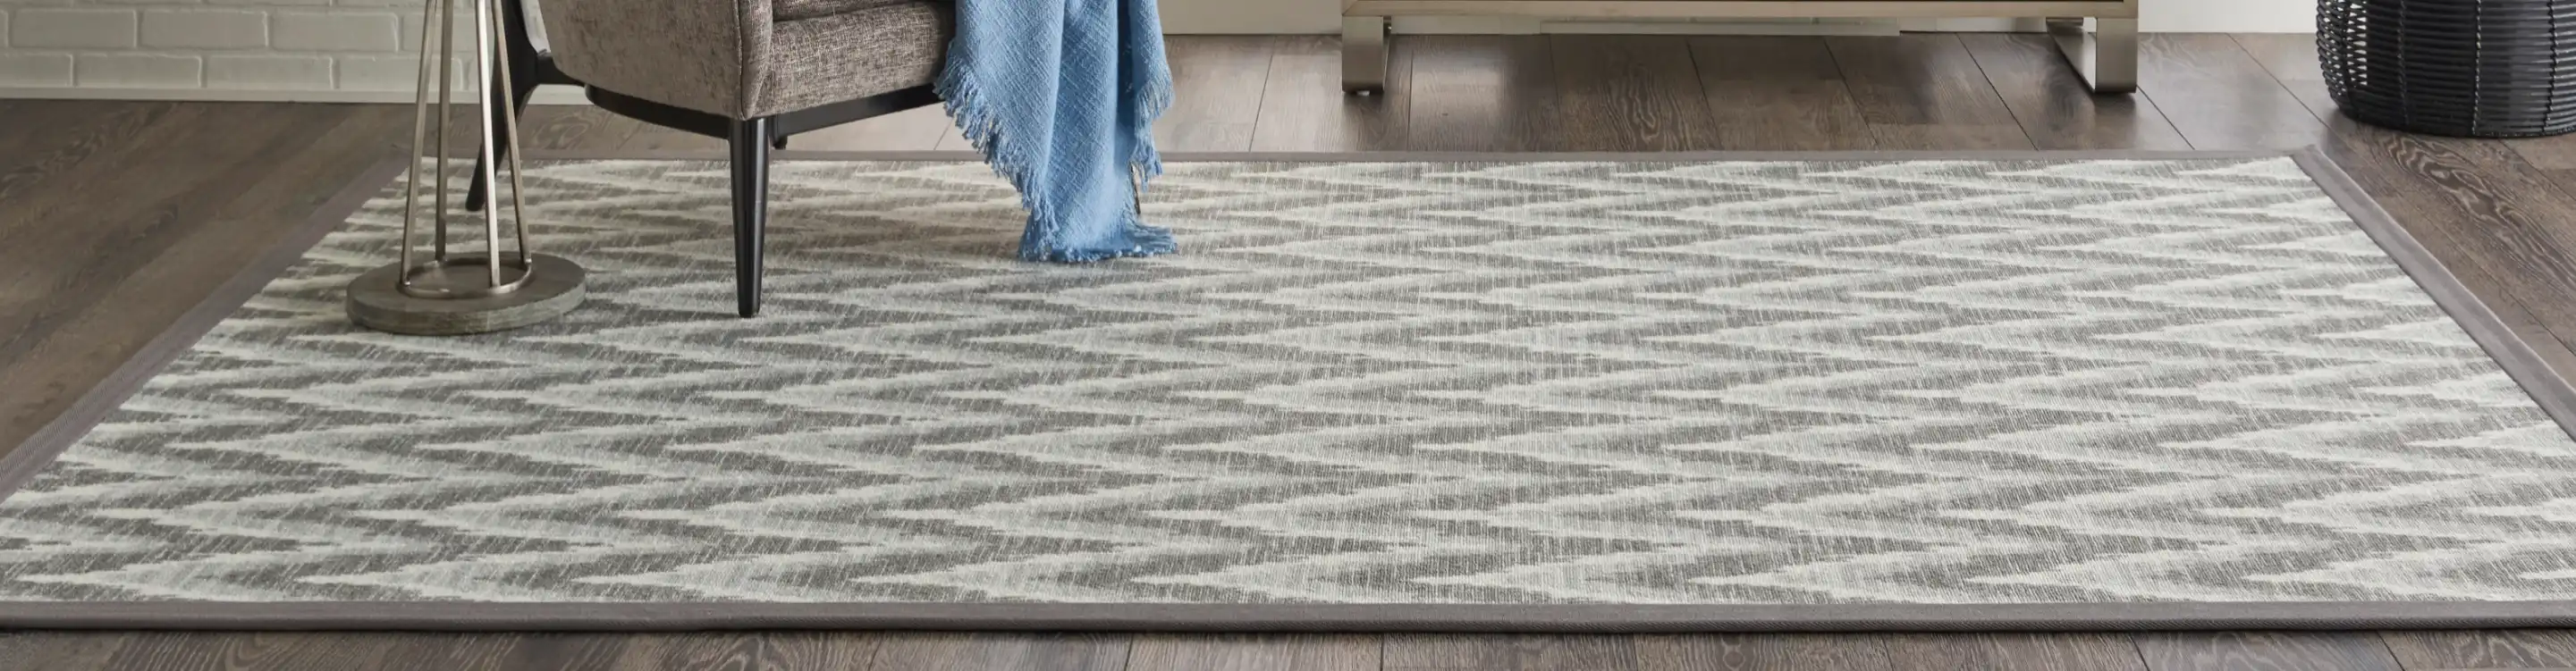 grey patterned area rug in living room